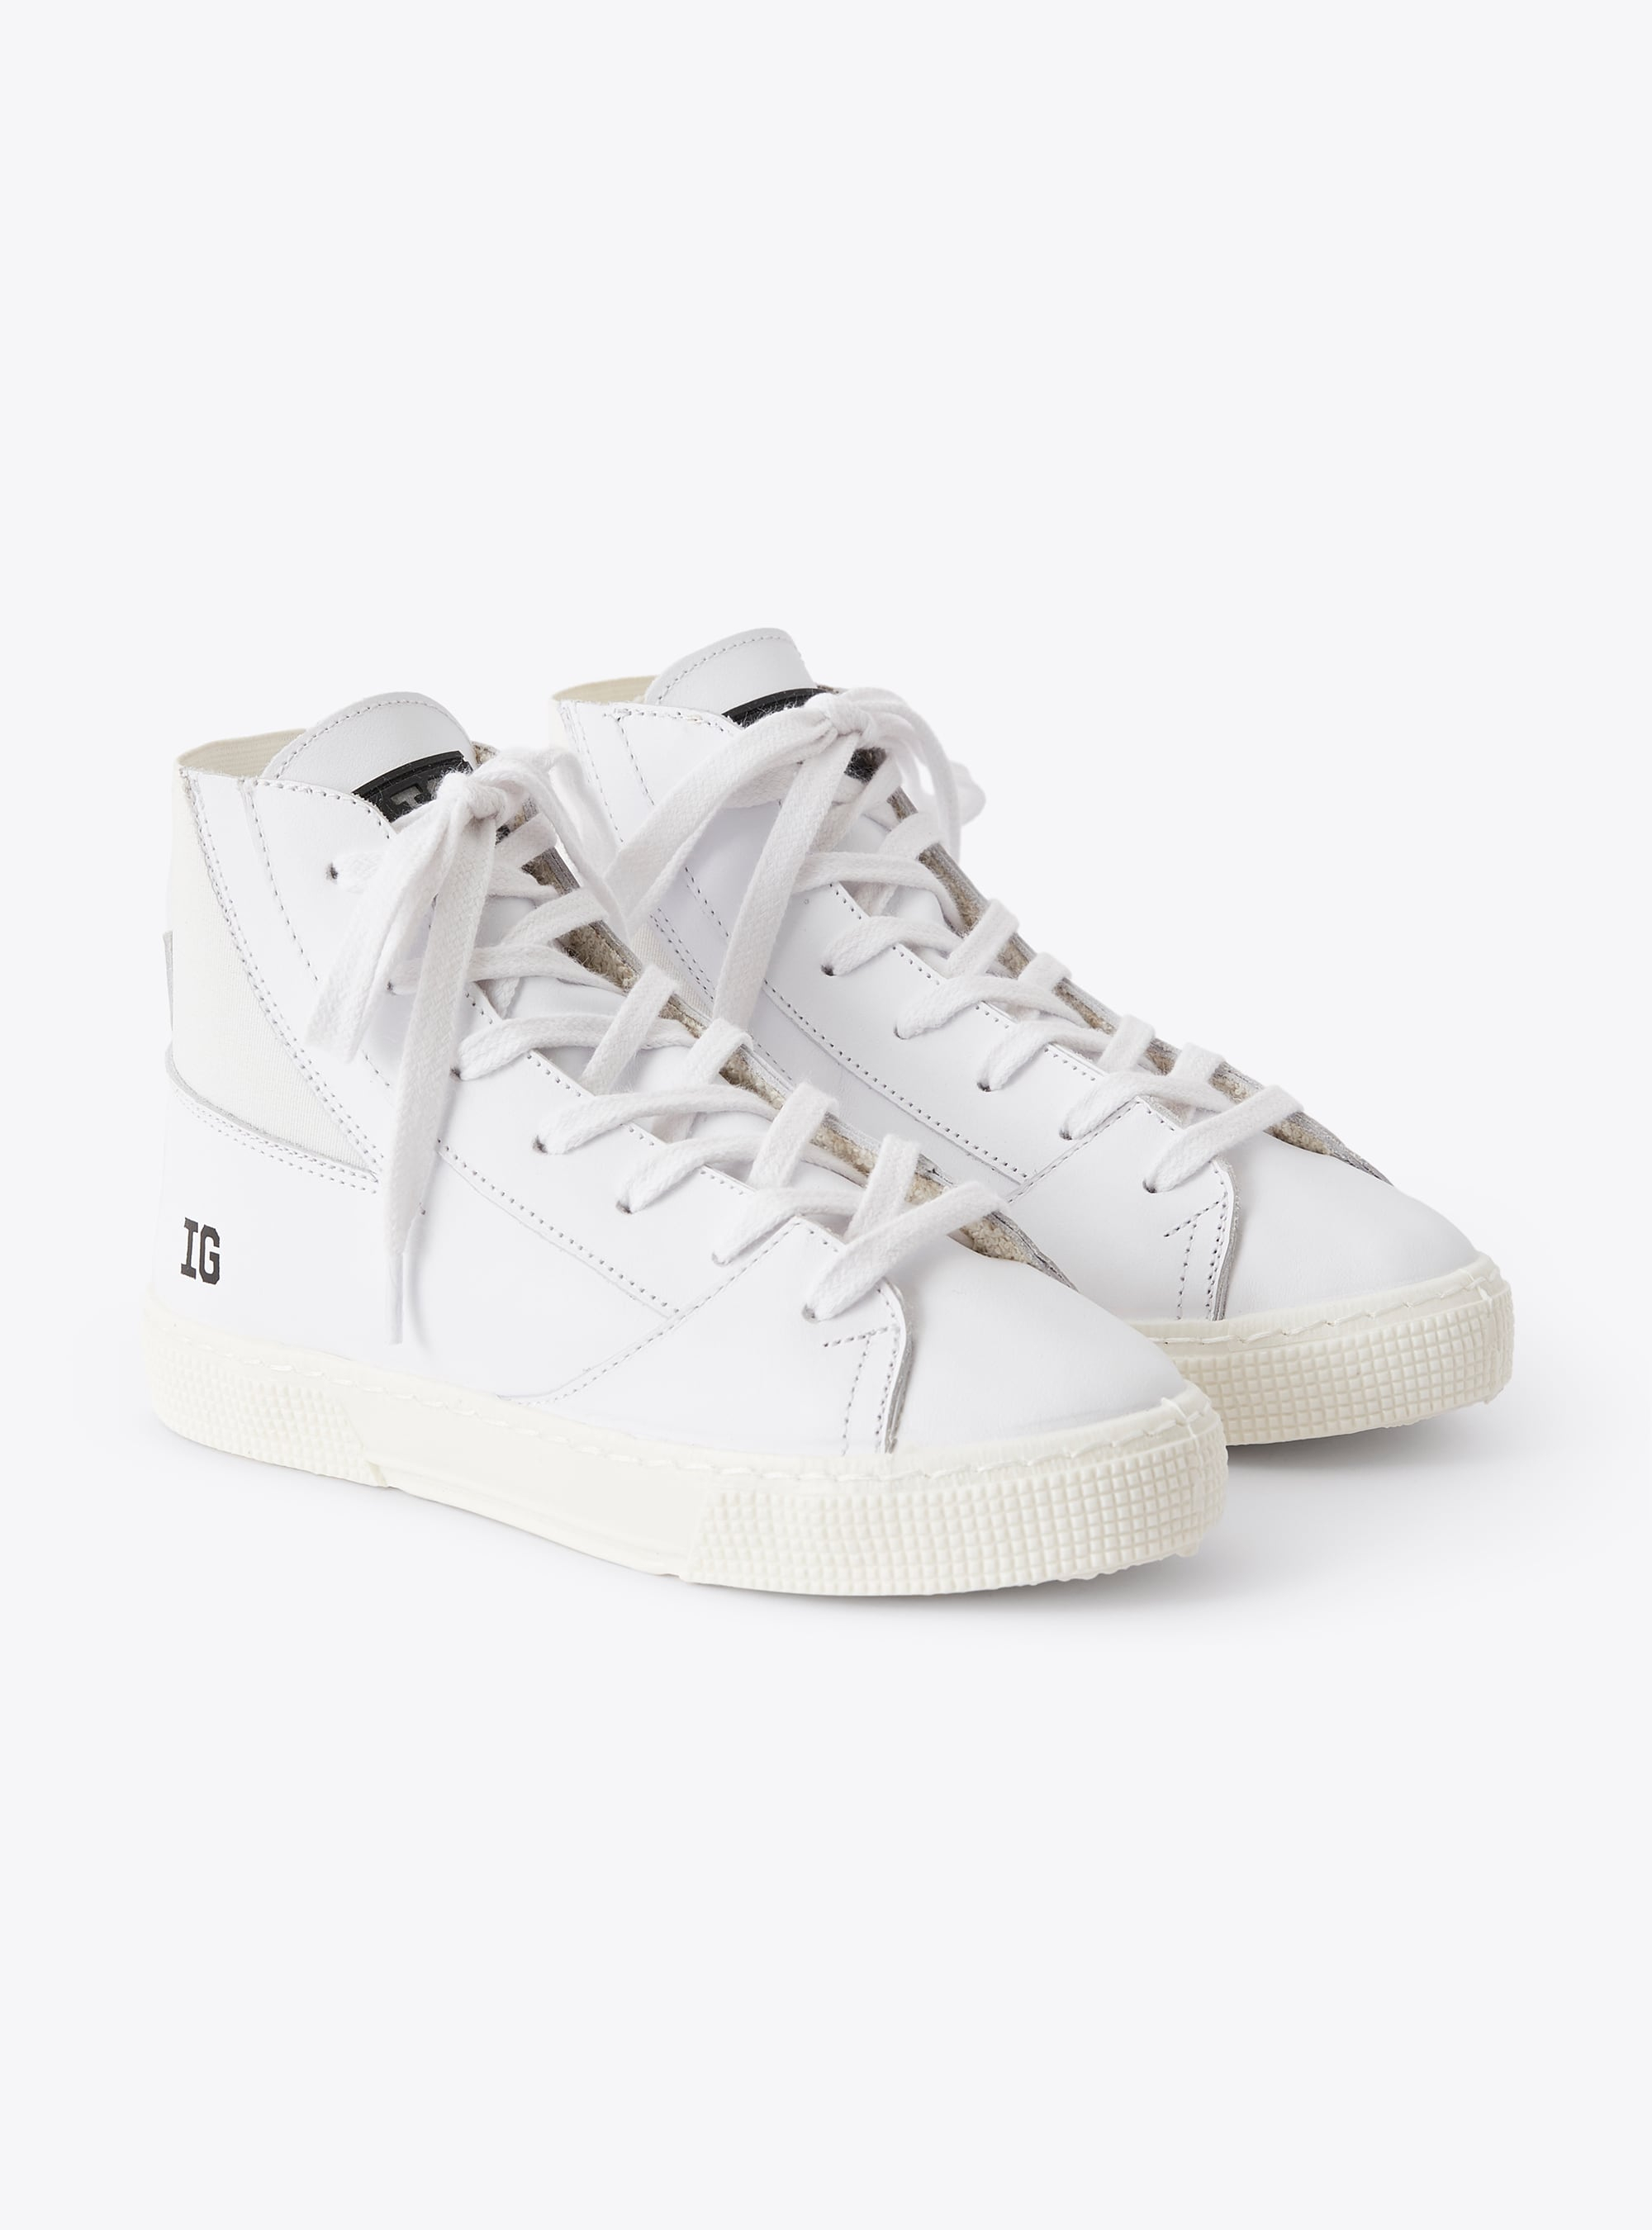 High-top IG sneaker in white leather - Shoes - Il Gufo